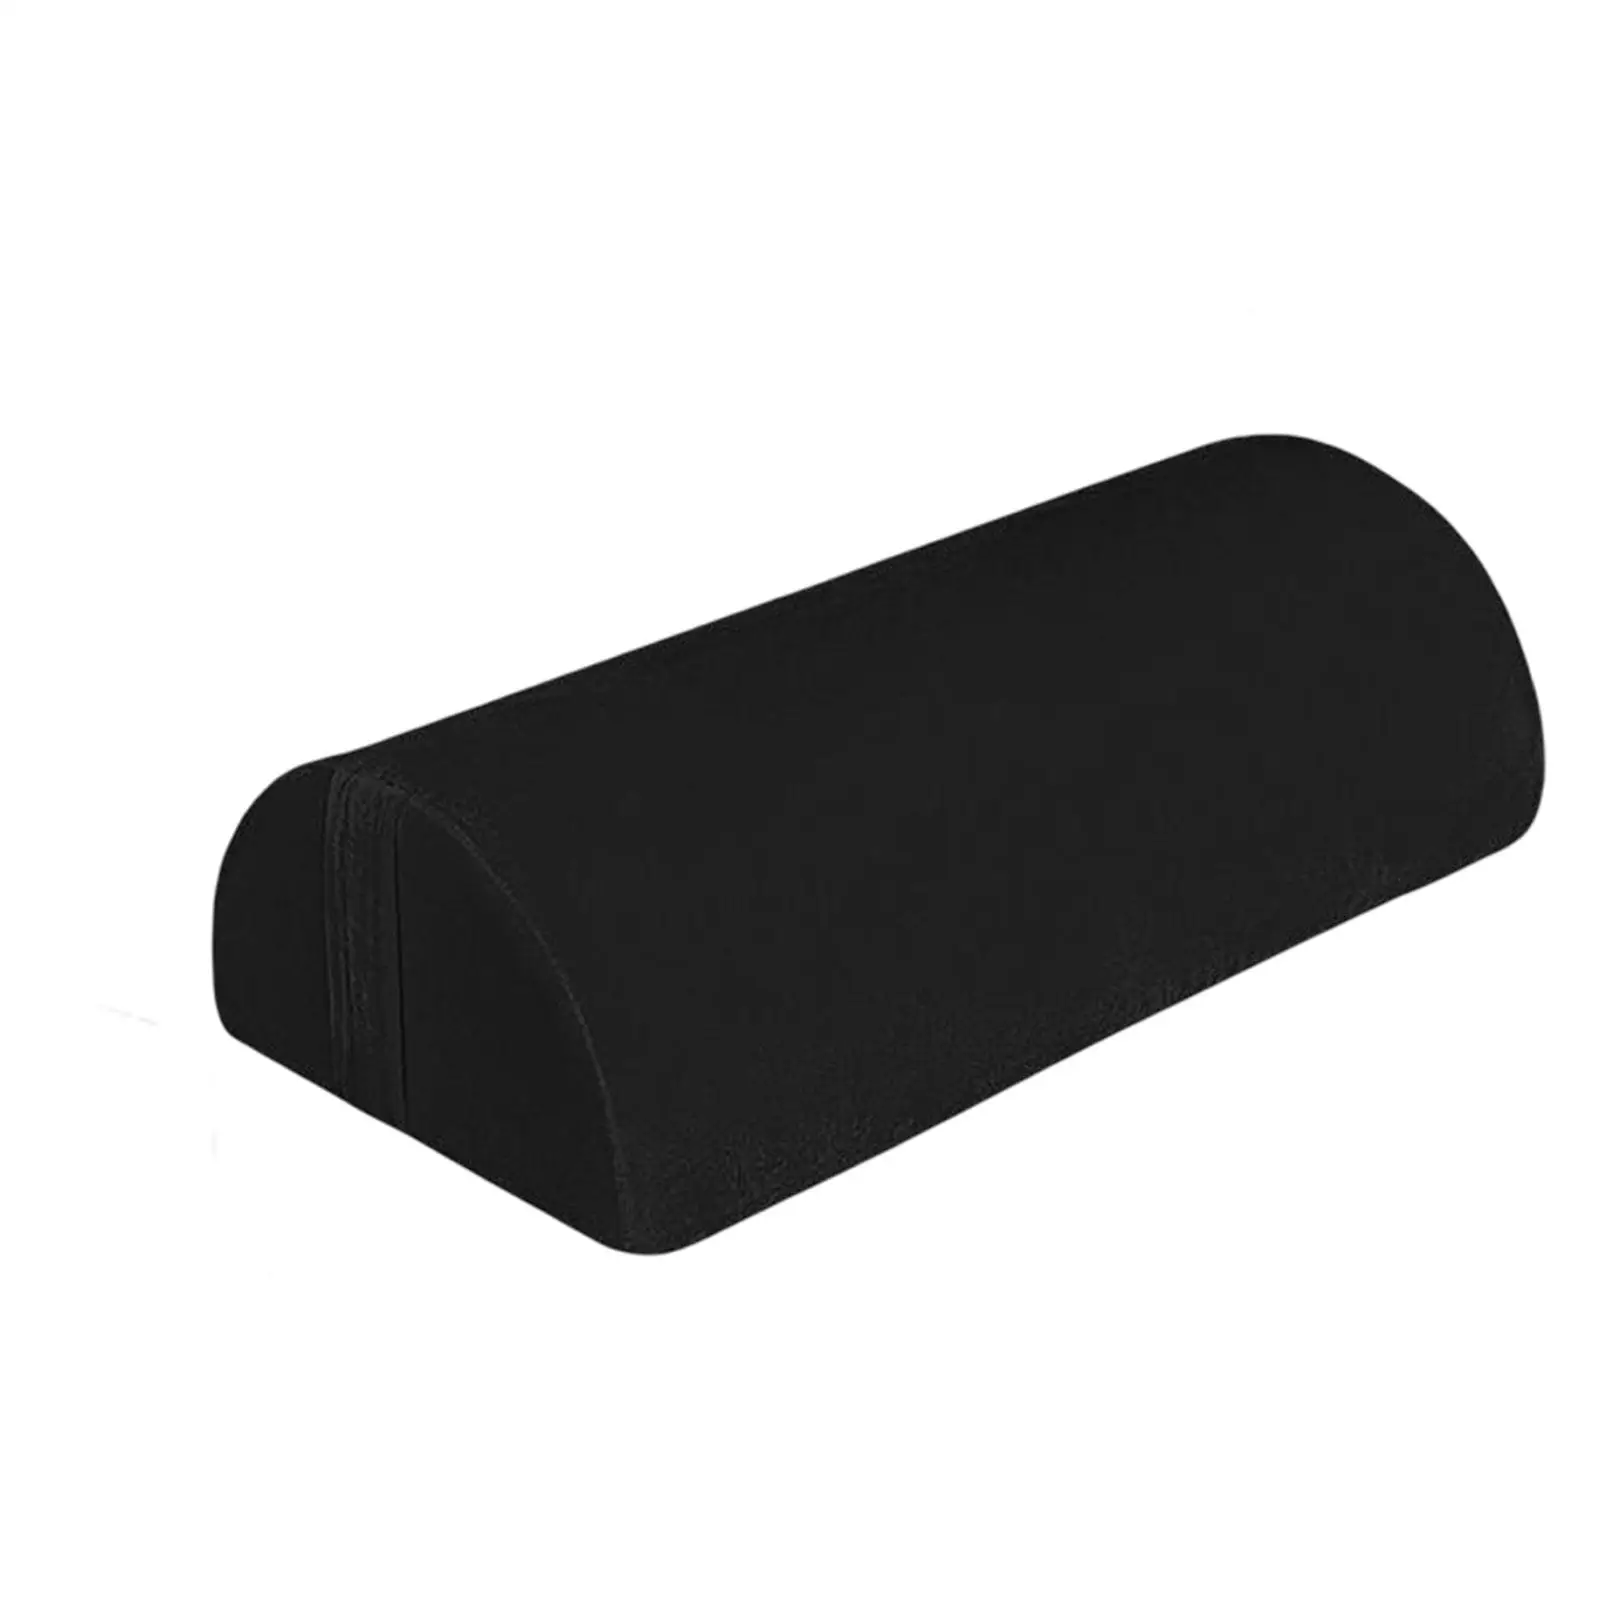 Non Slip Leg Support cushion Soft Ergonomic Footrest Pillow for Gift Office Accessories Computer Gaming Bed